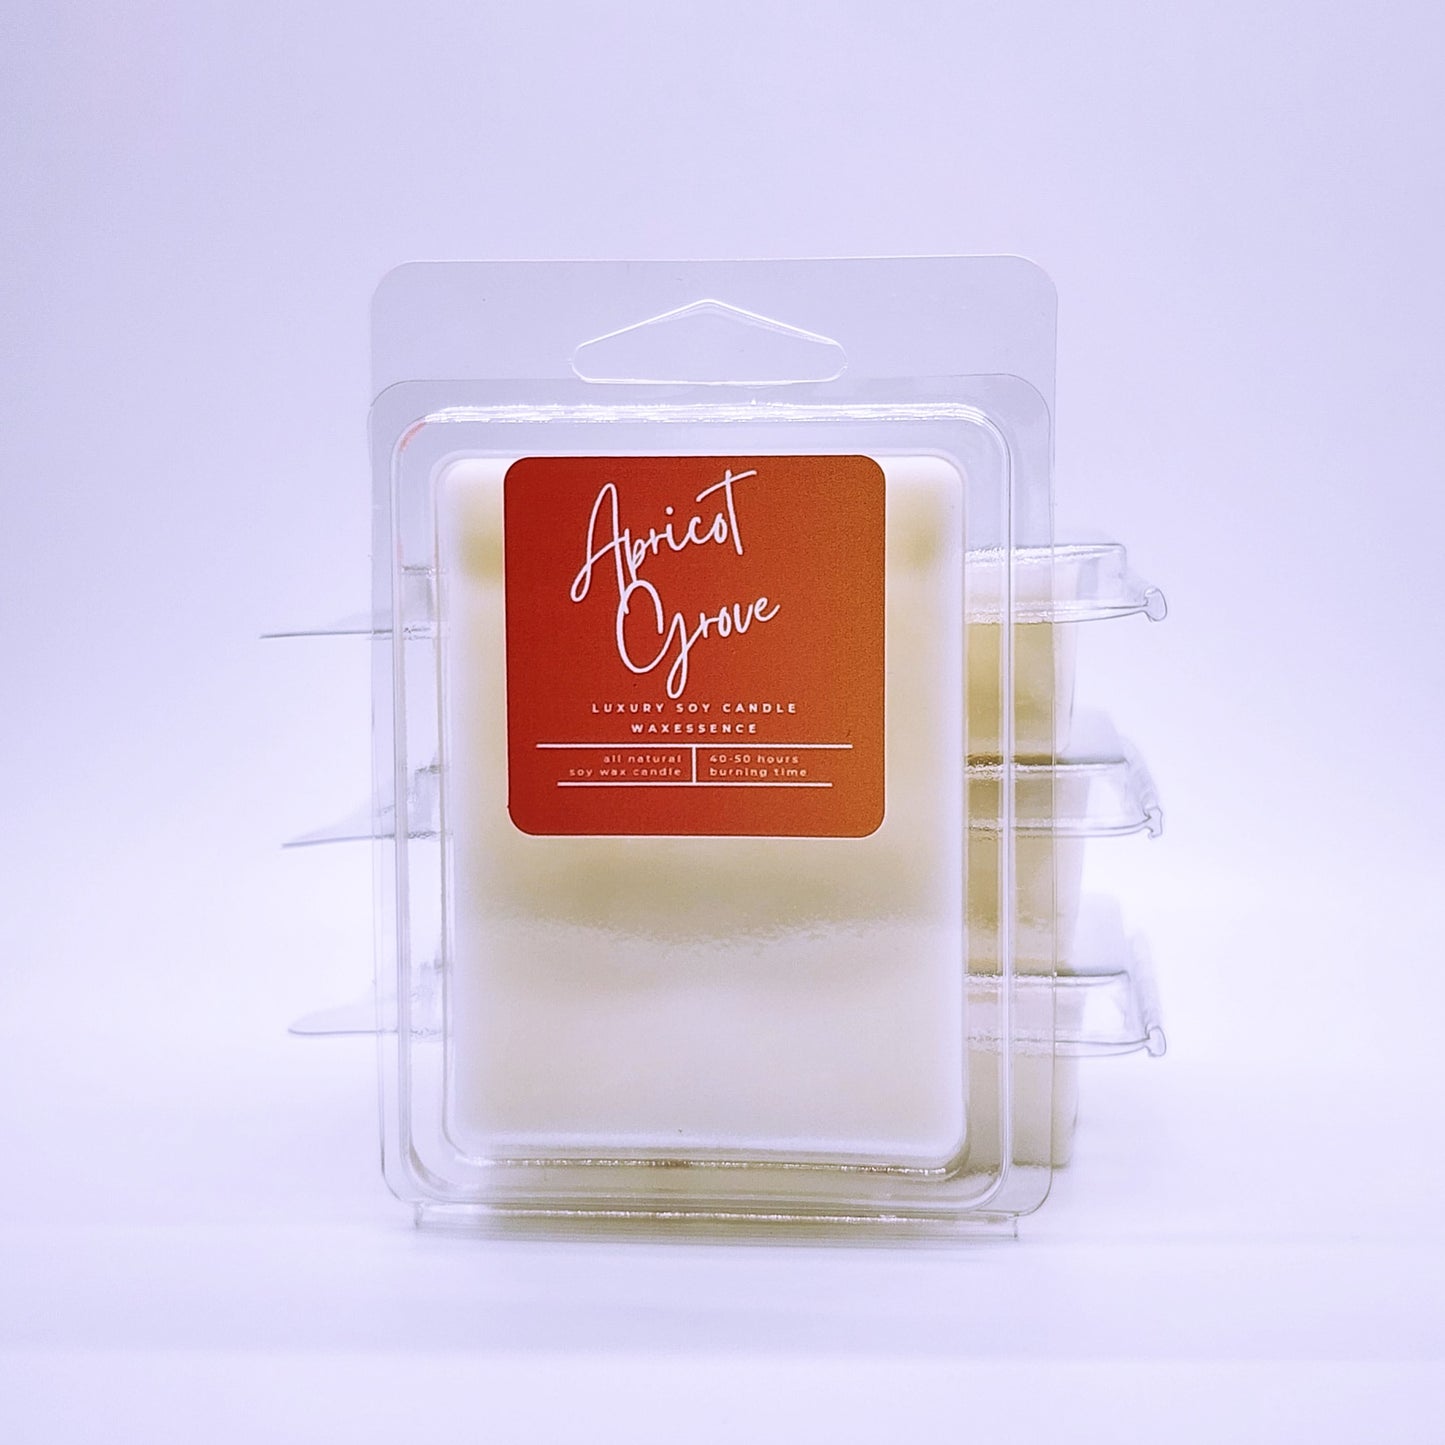 Apricot Grove Soy Wax Melts